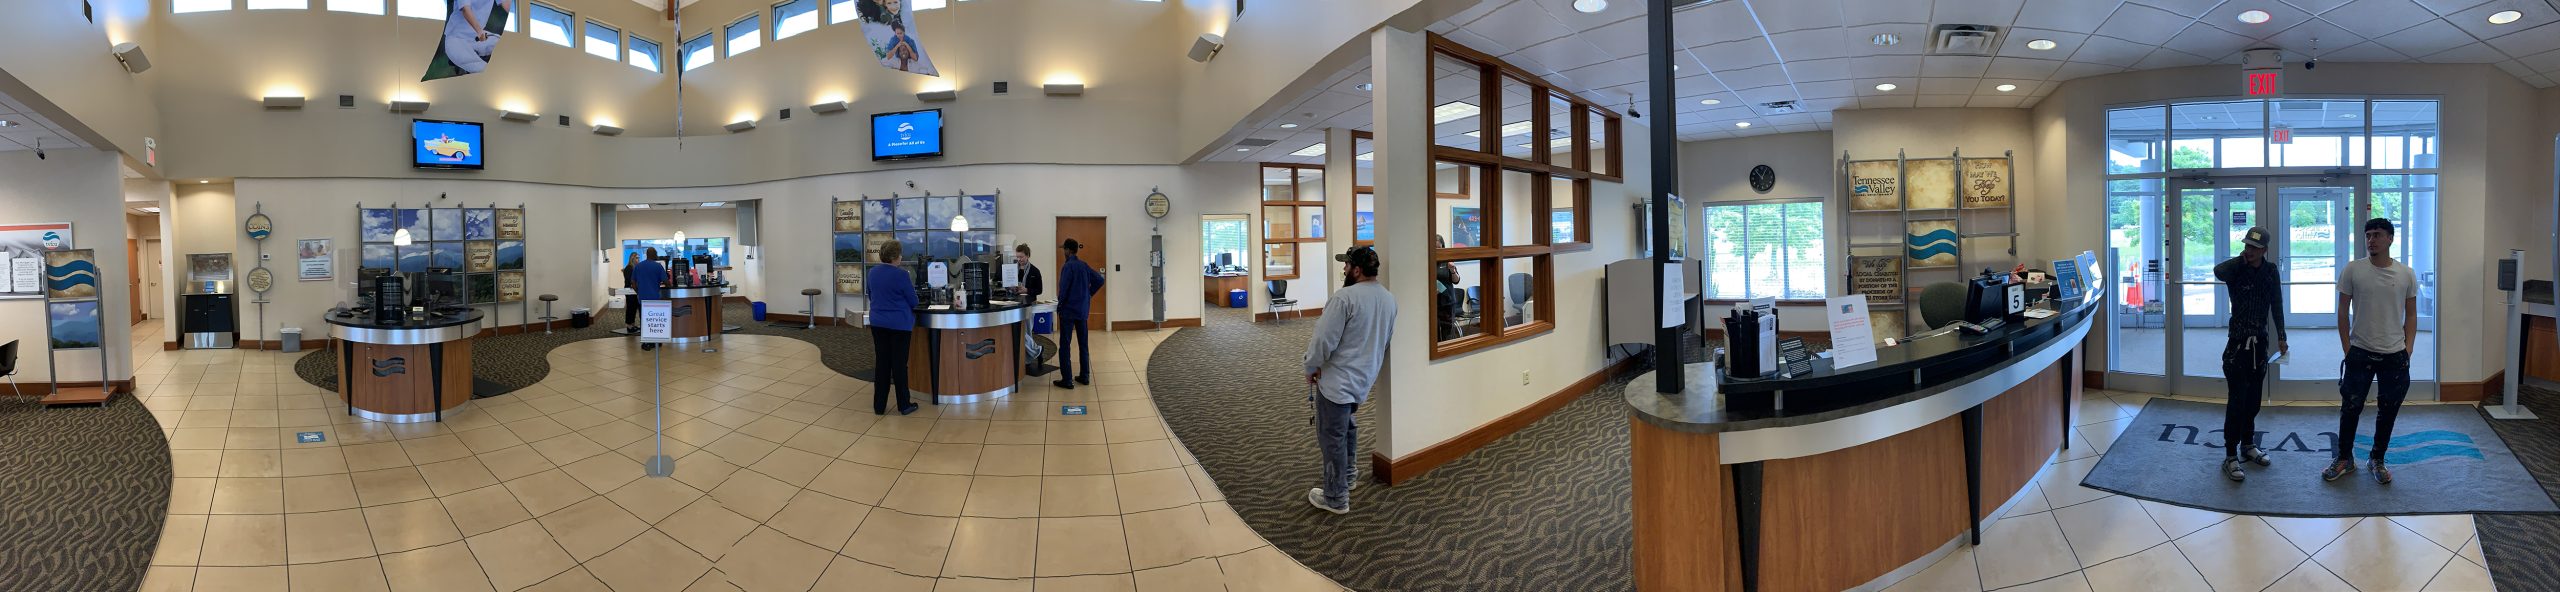 Tennessee Valley Federal Credit Union Branch Remodel Project Before 